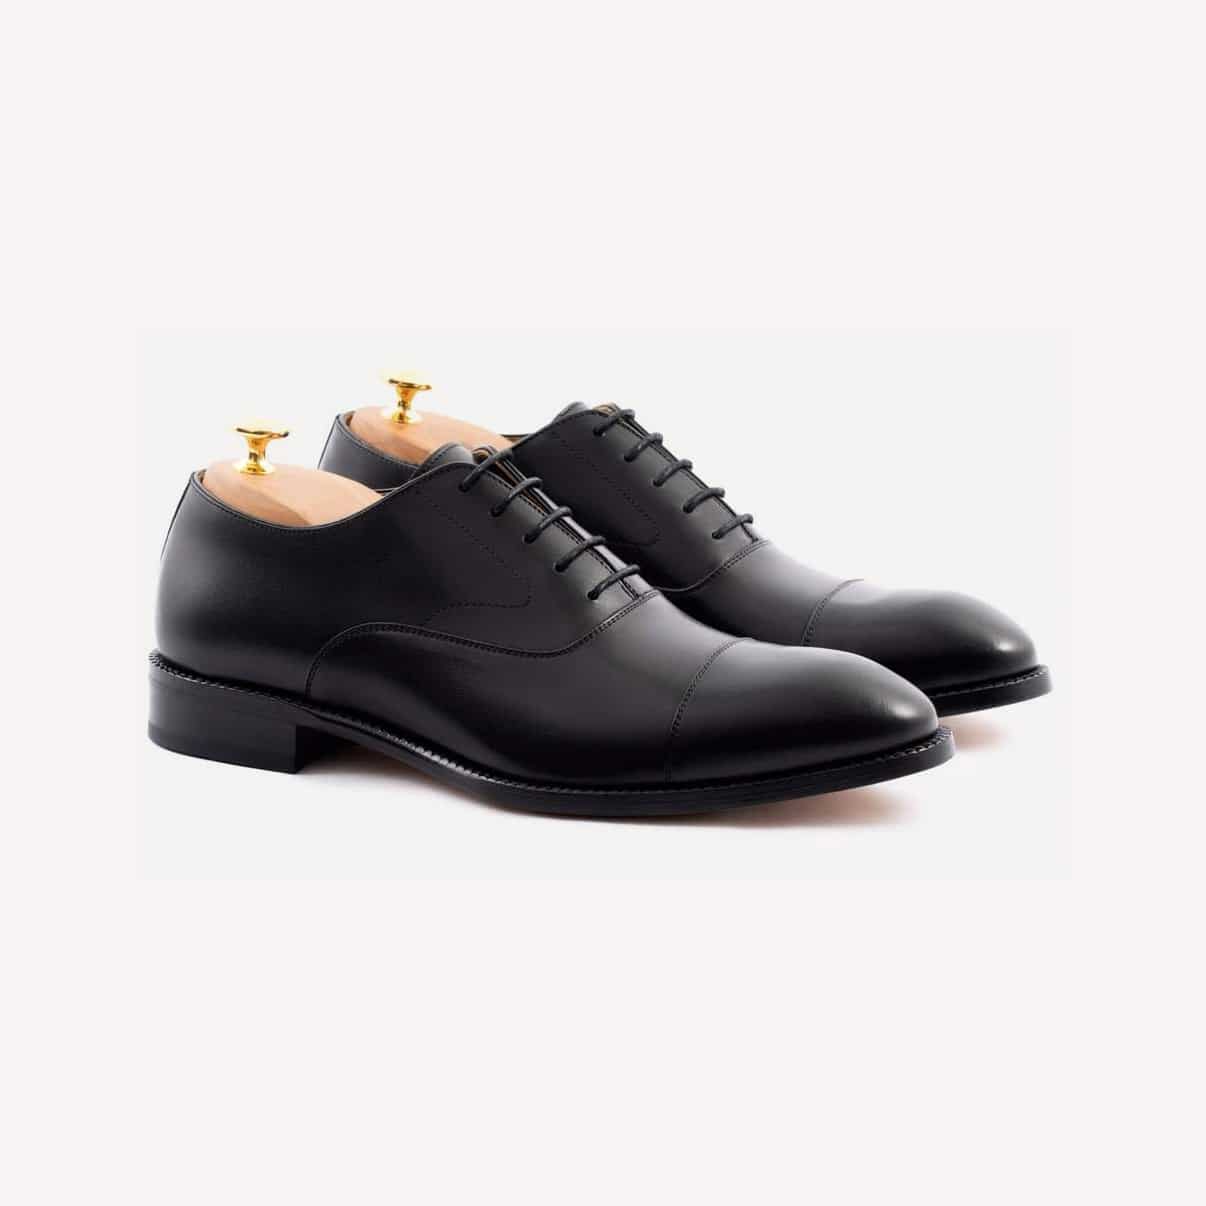 Business Casual Shoes for Men: The 8 Best Options to Step Out in